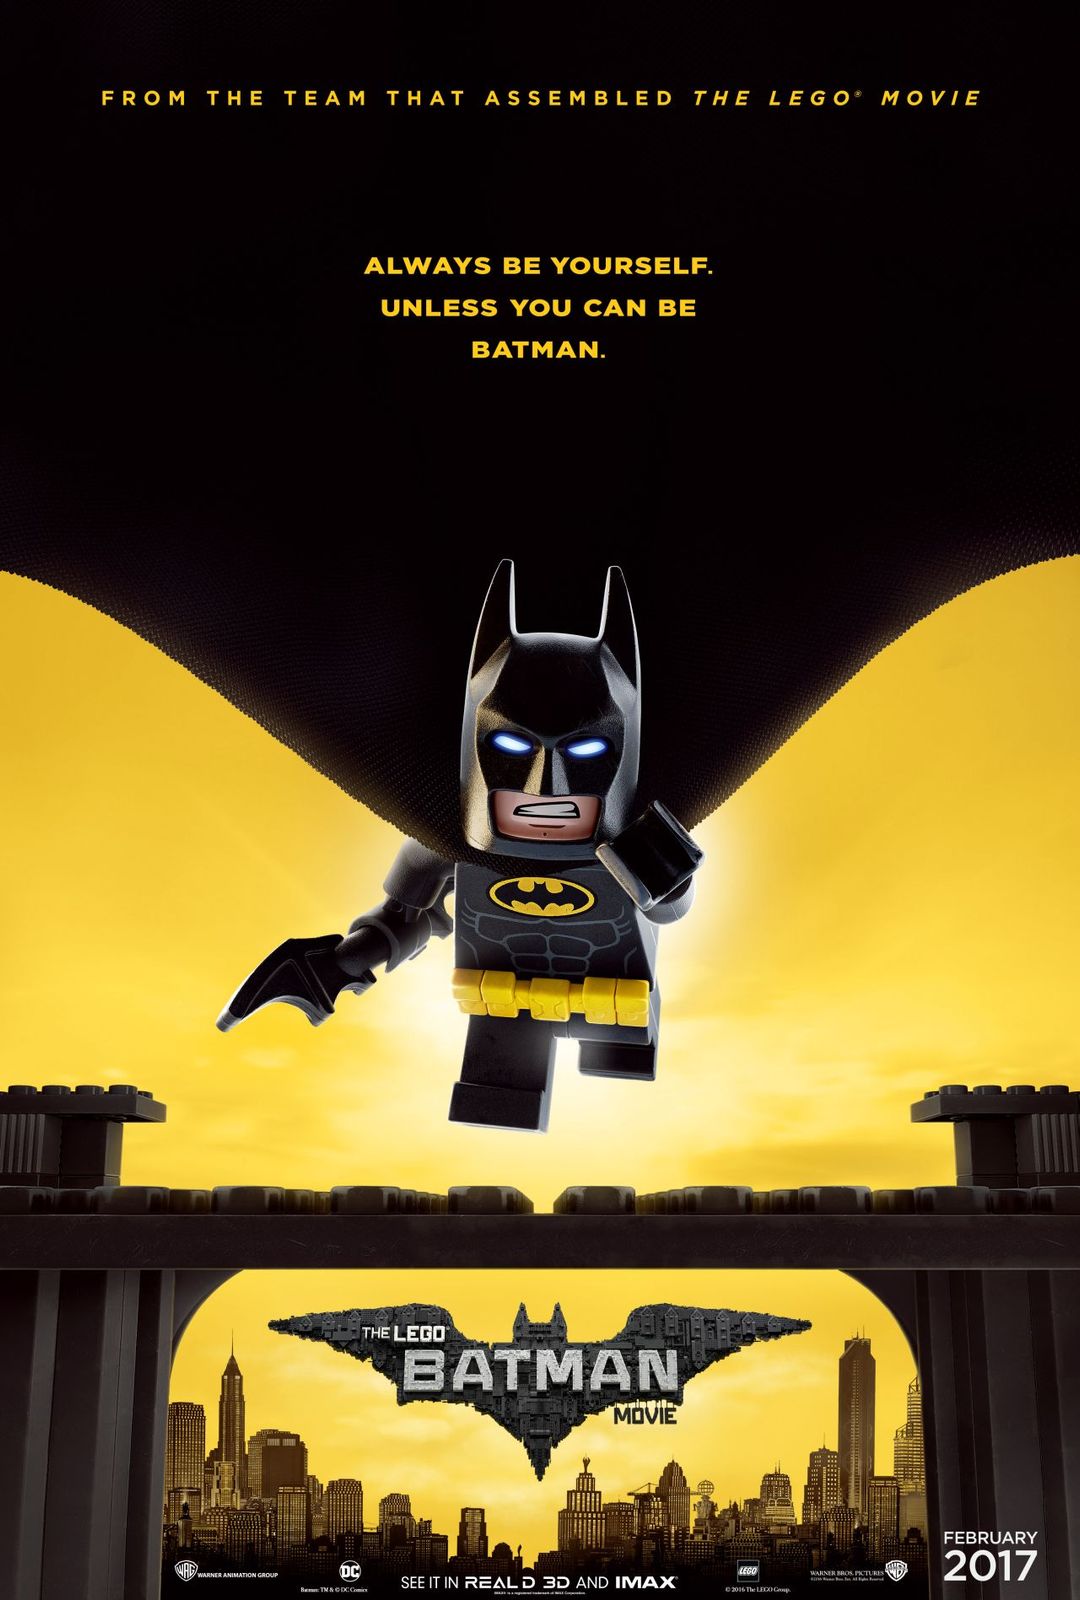 The LEGO Batman Movie Poster Released